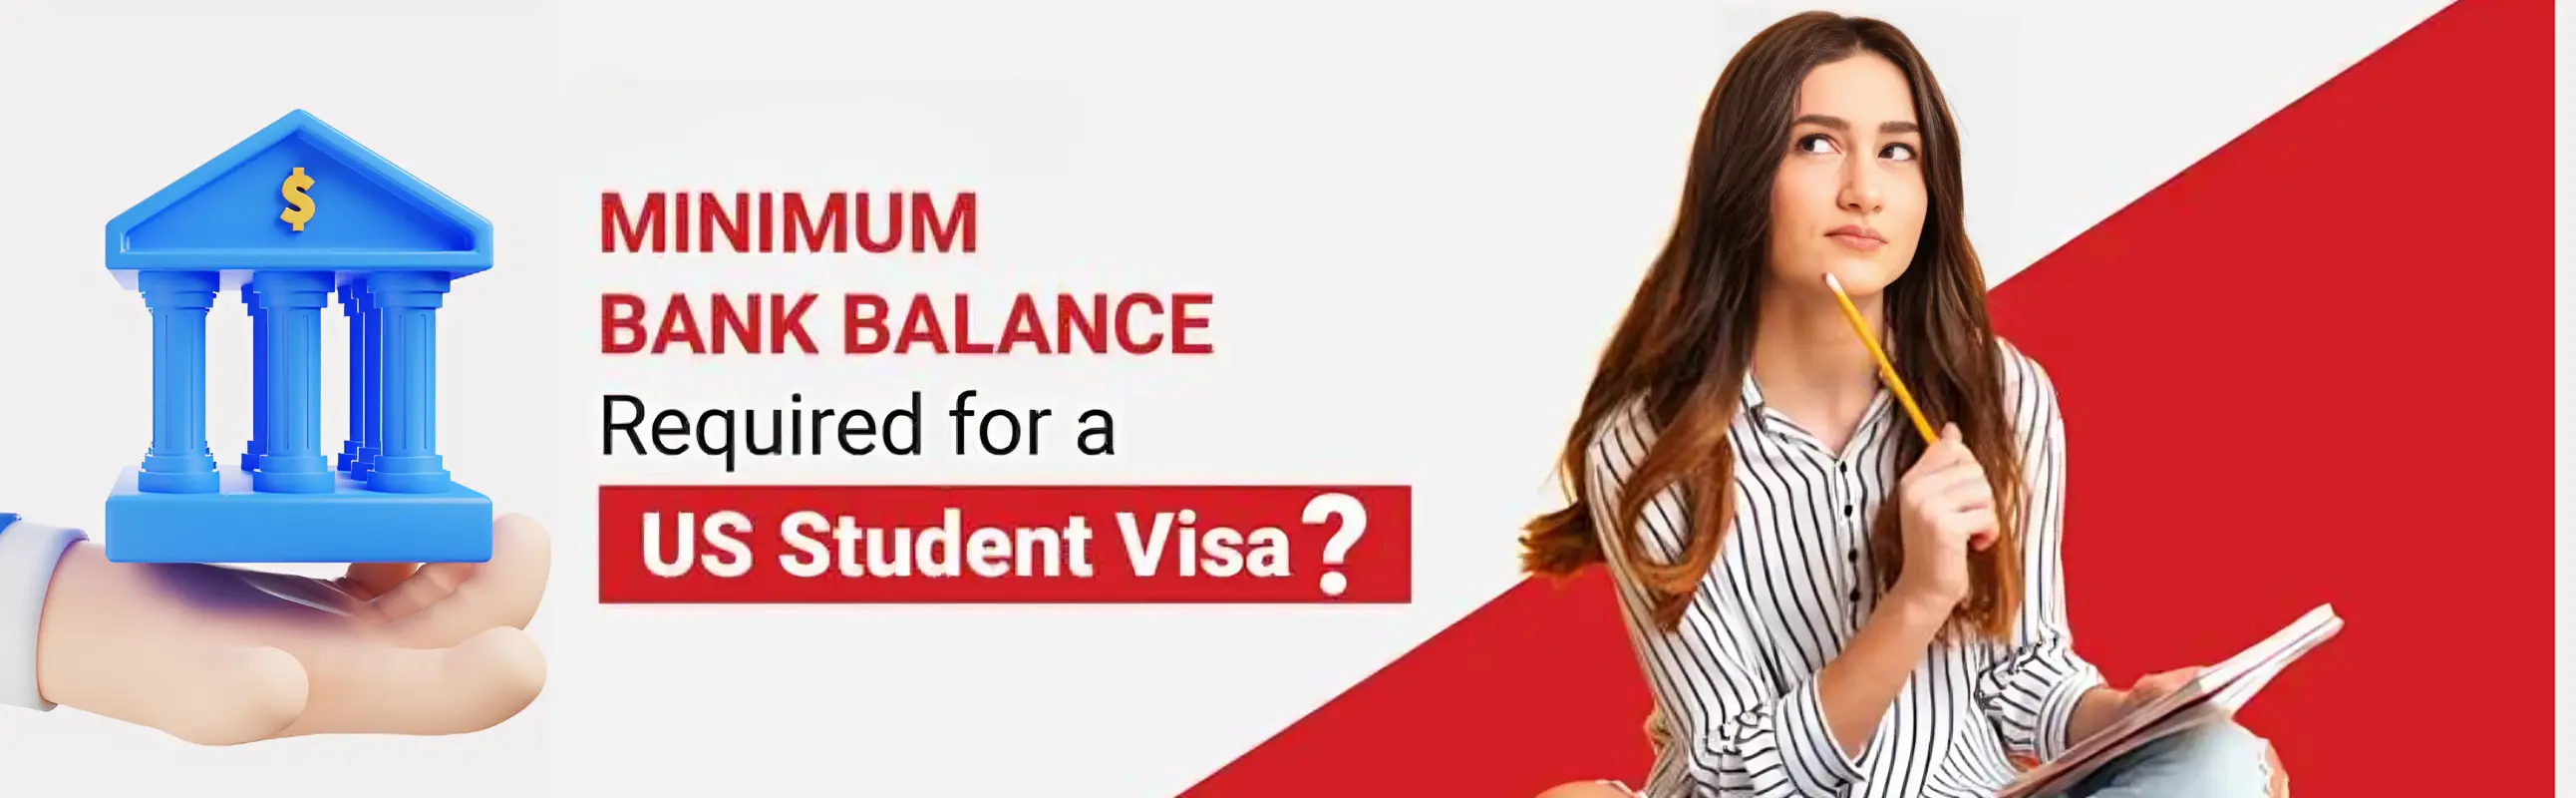 banner How Much Bank Balance for USA Student Visa? - Find Out Now!